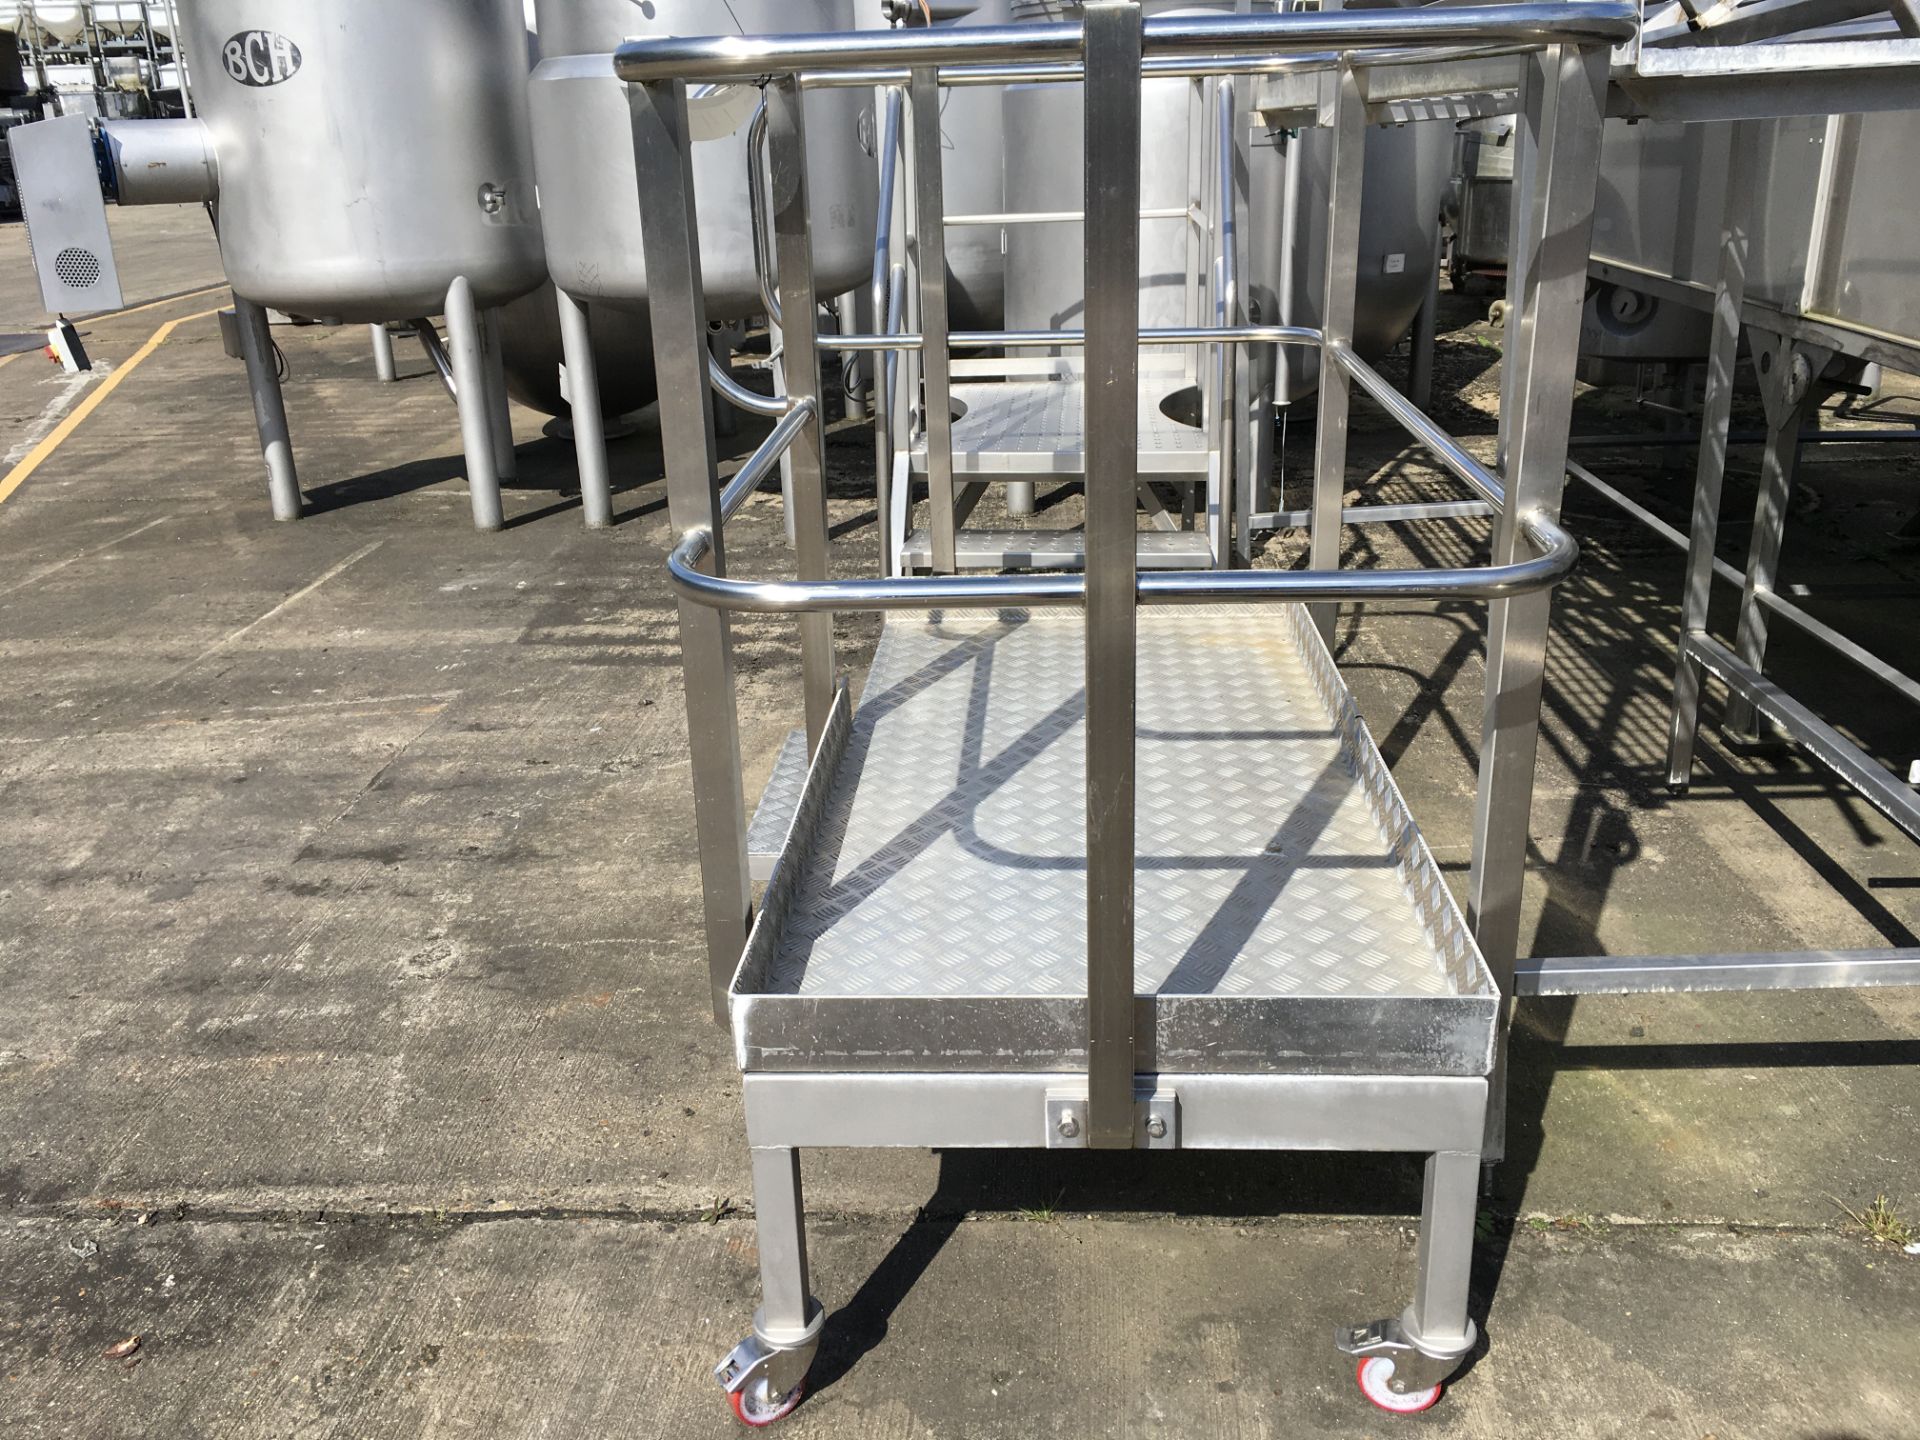 Mobile Stainless Steel Platform, approx. 1800mm long x 1200mm wide x 1650mm high, £50 lift out - Image 2 of 2